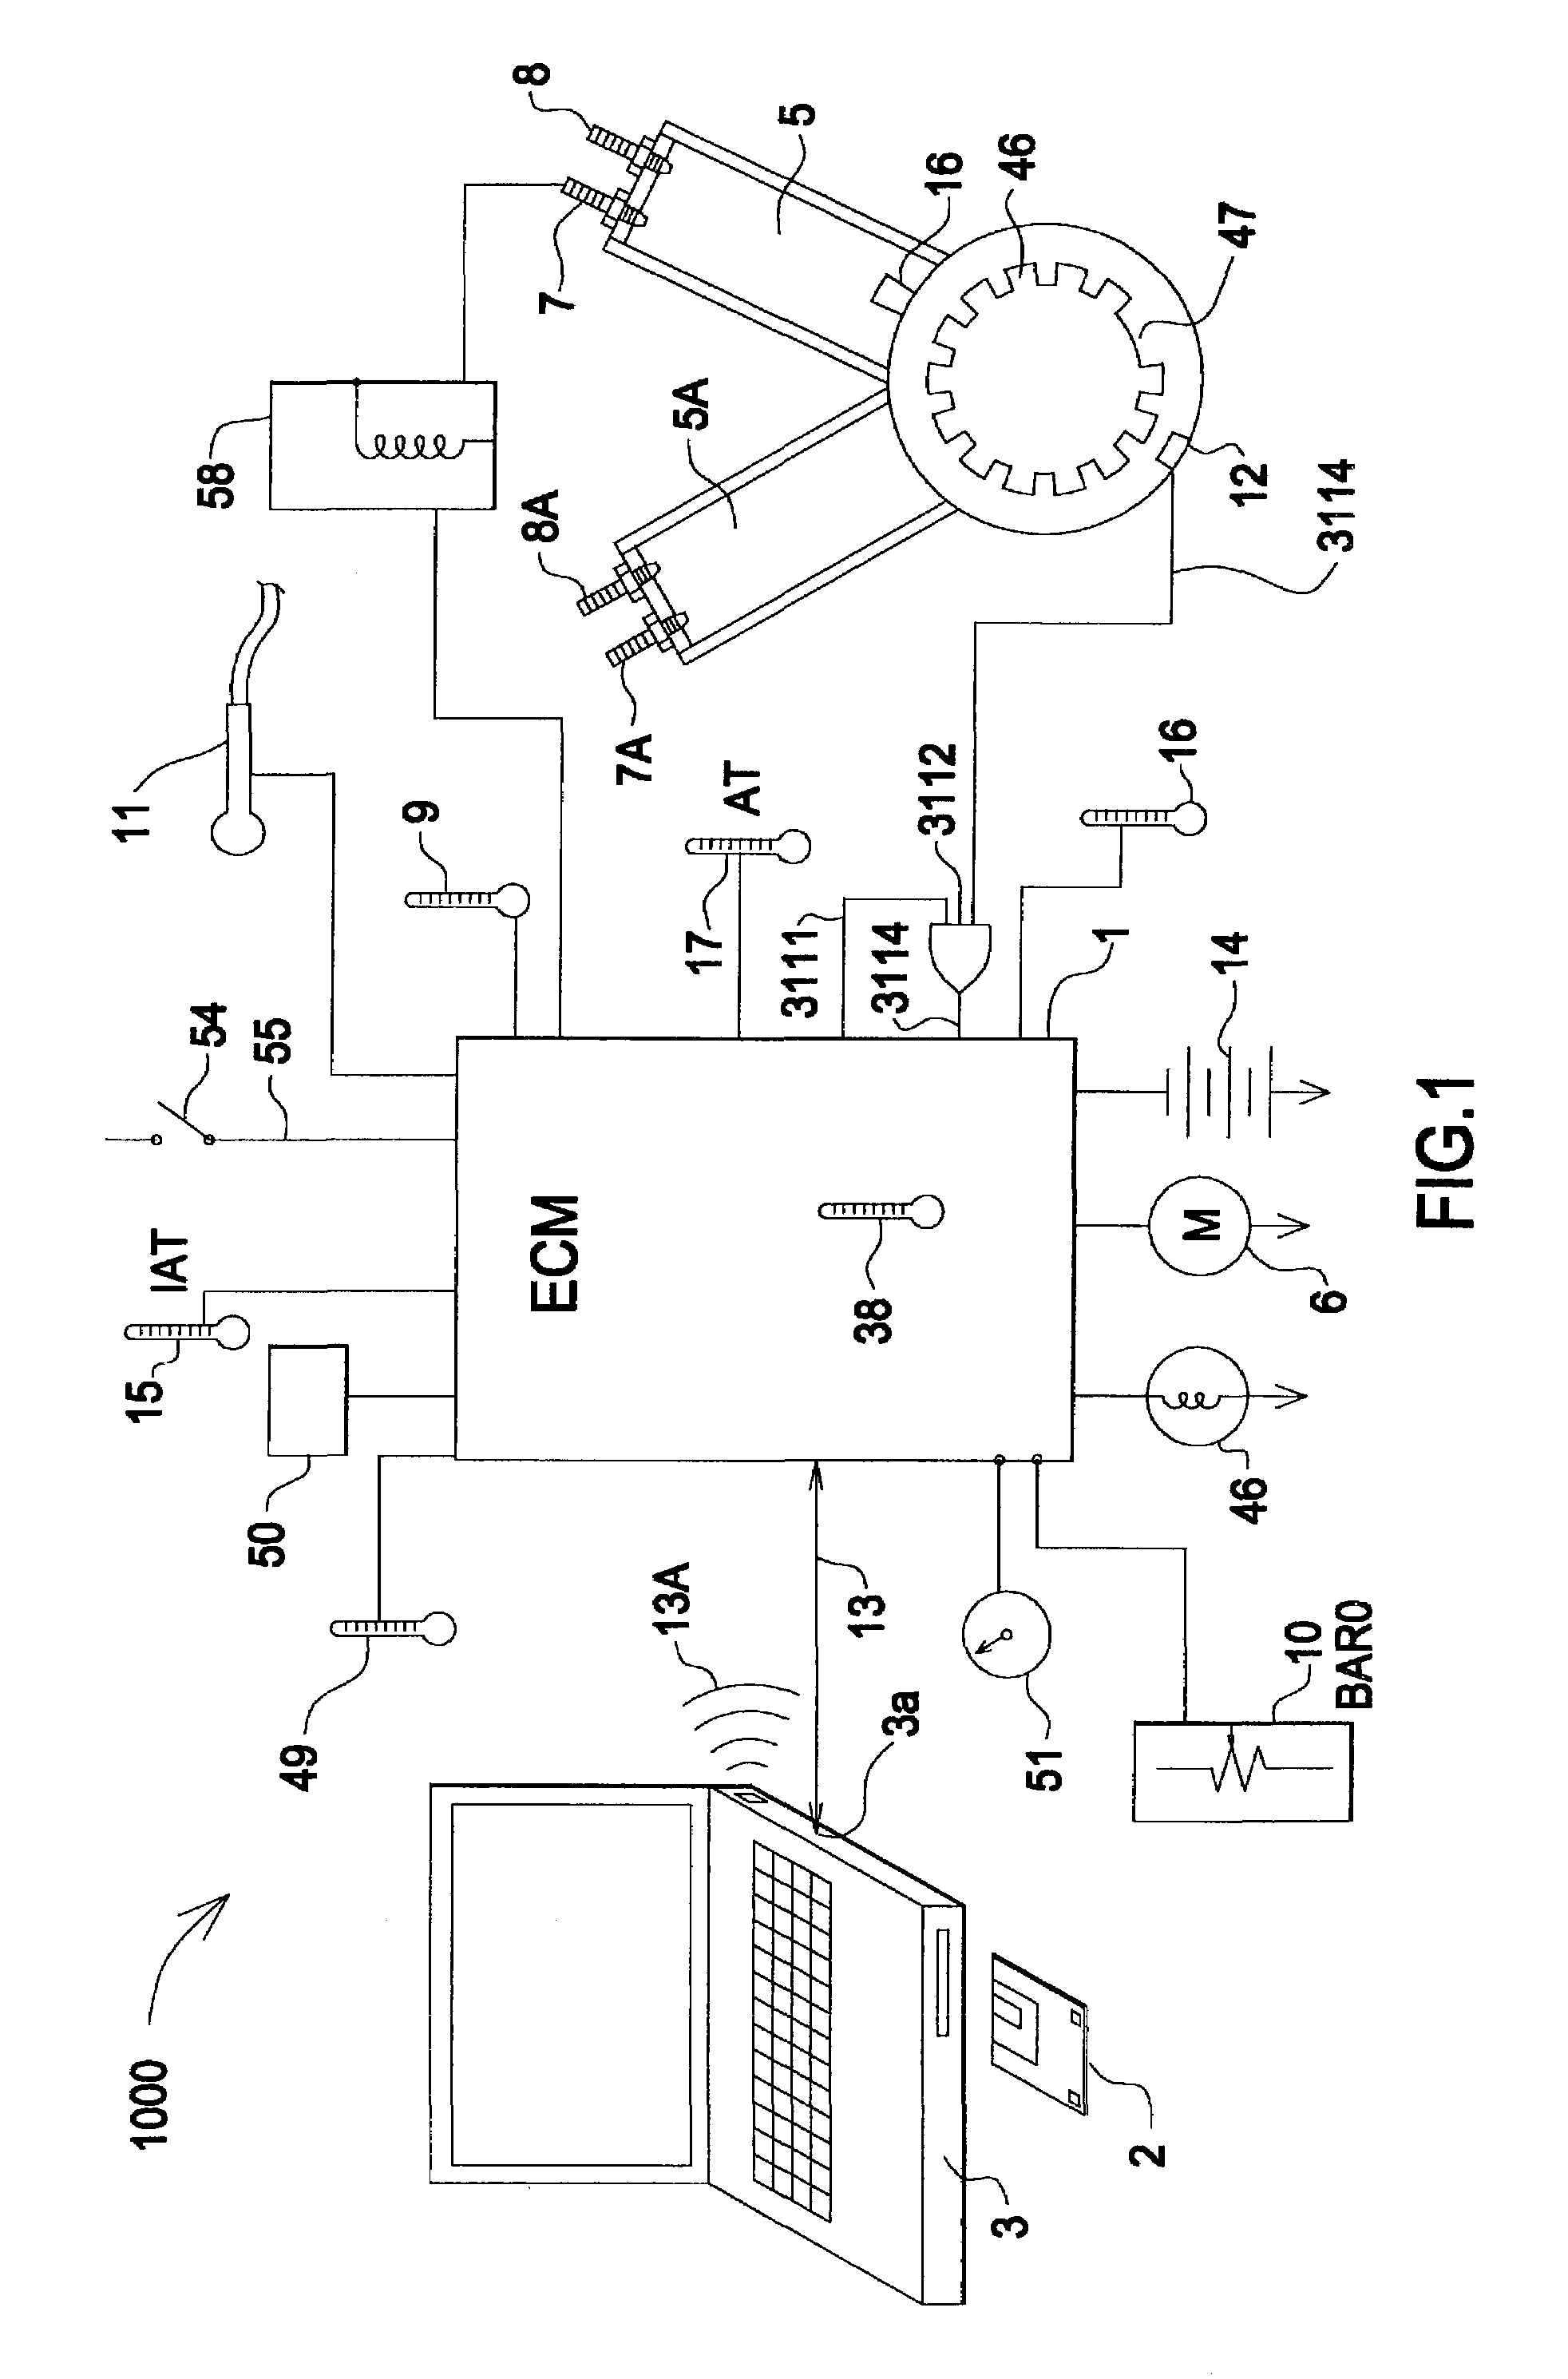 Programmable internal combustion engine controller